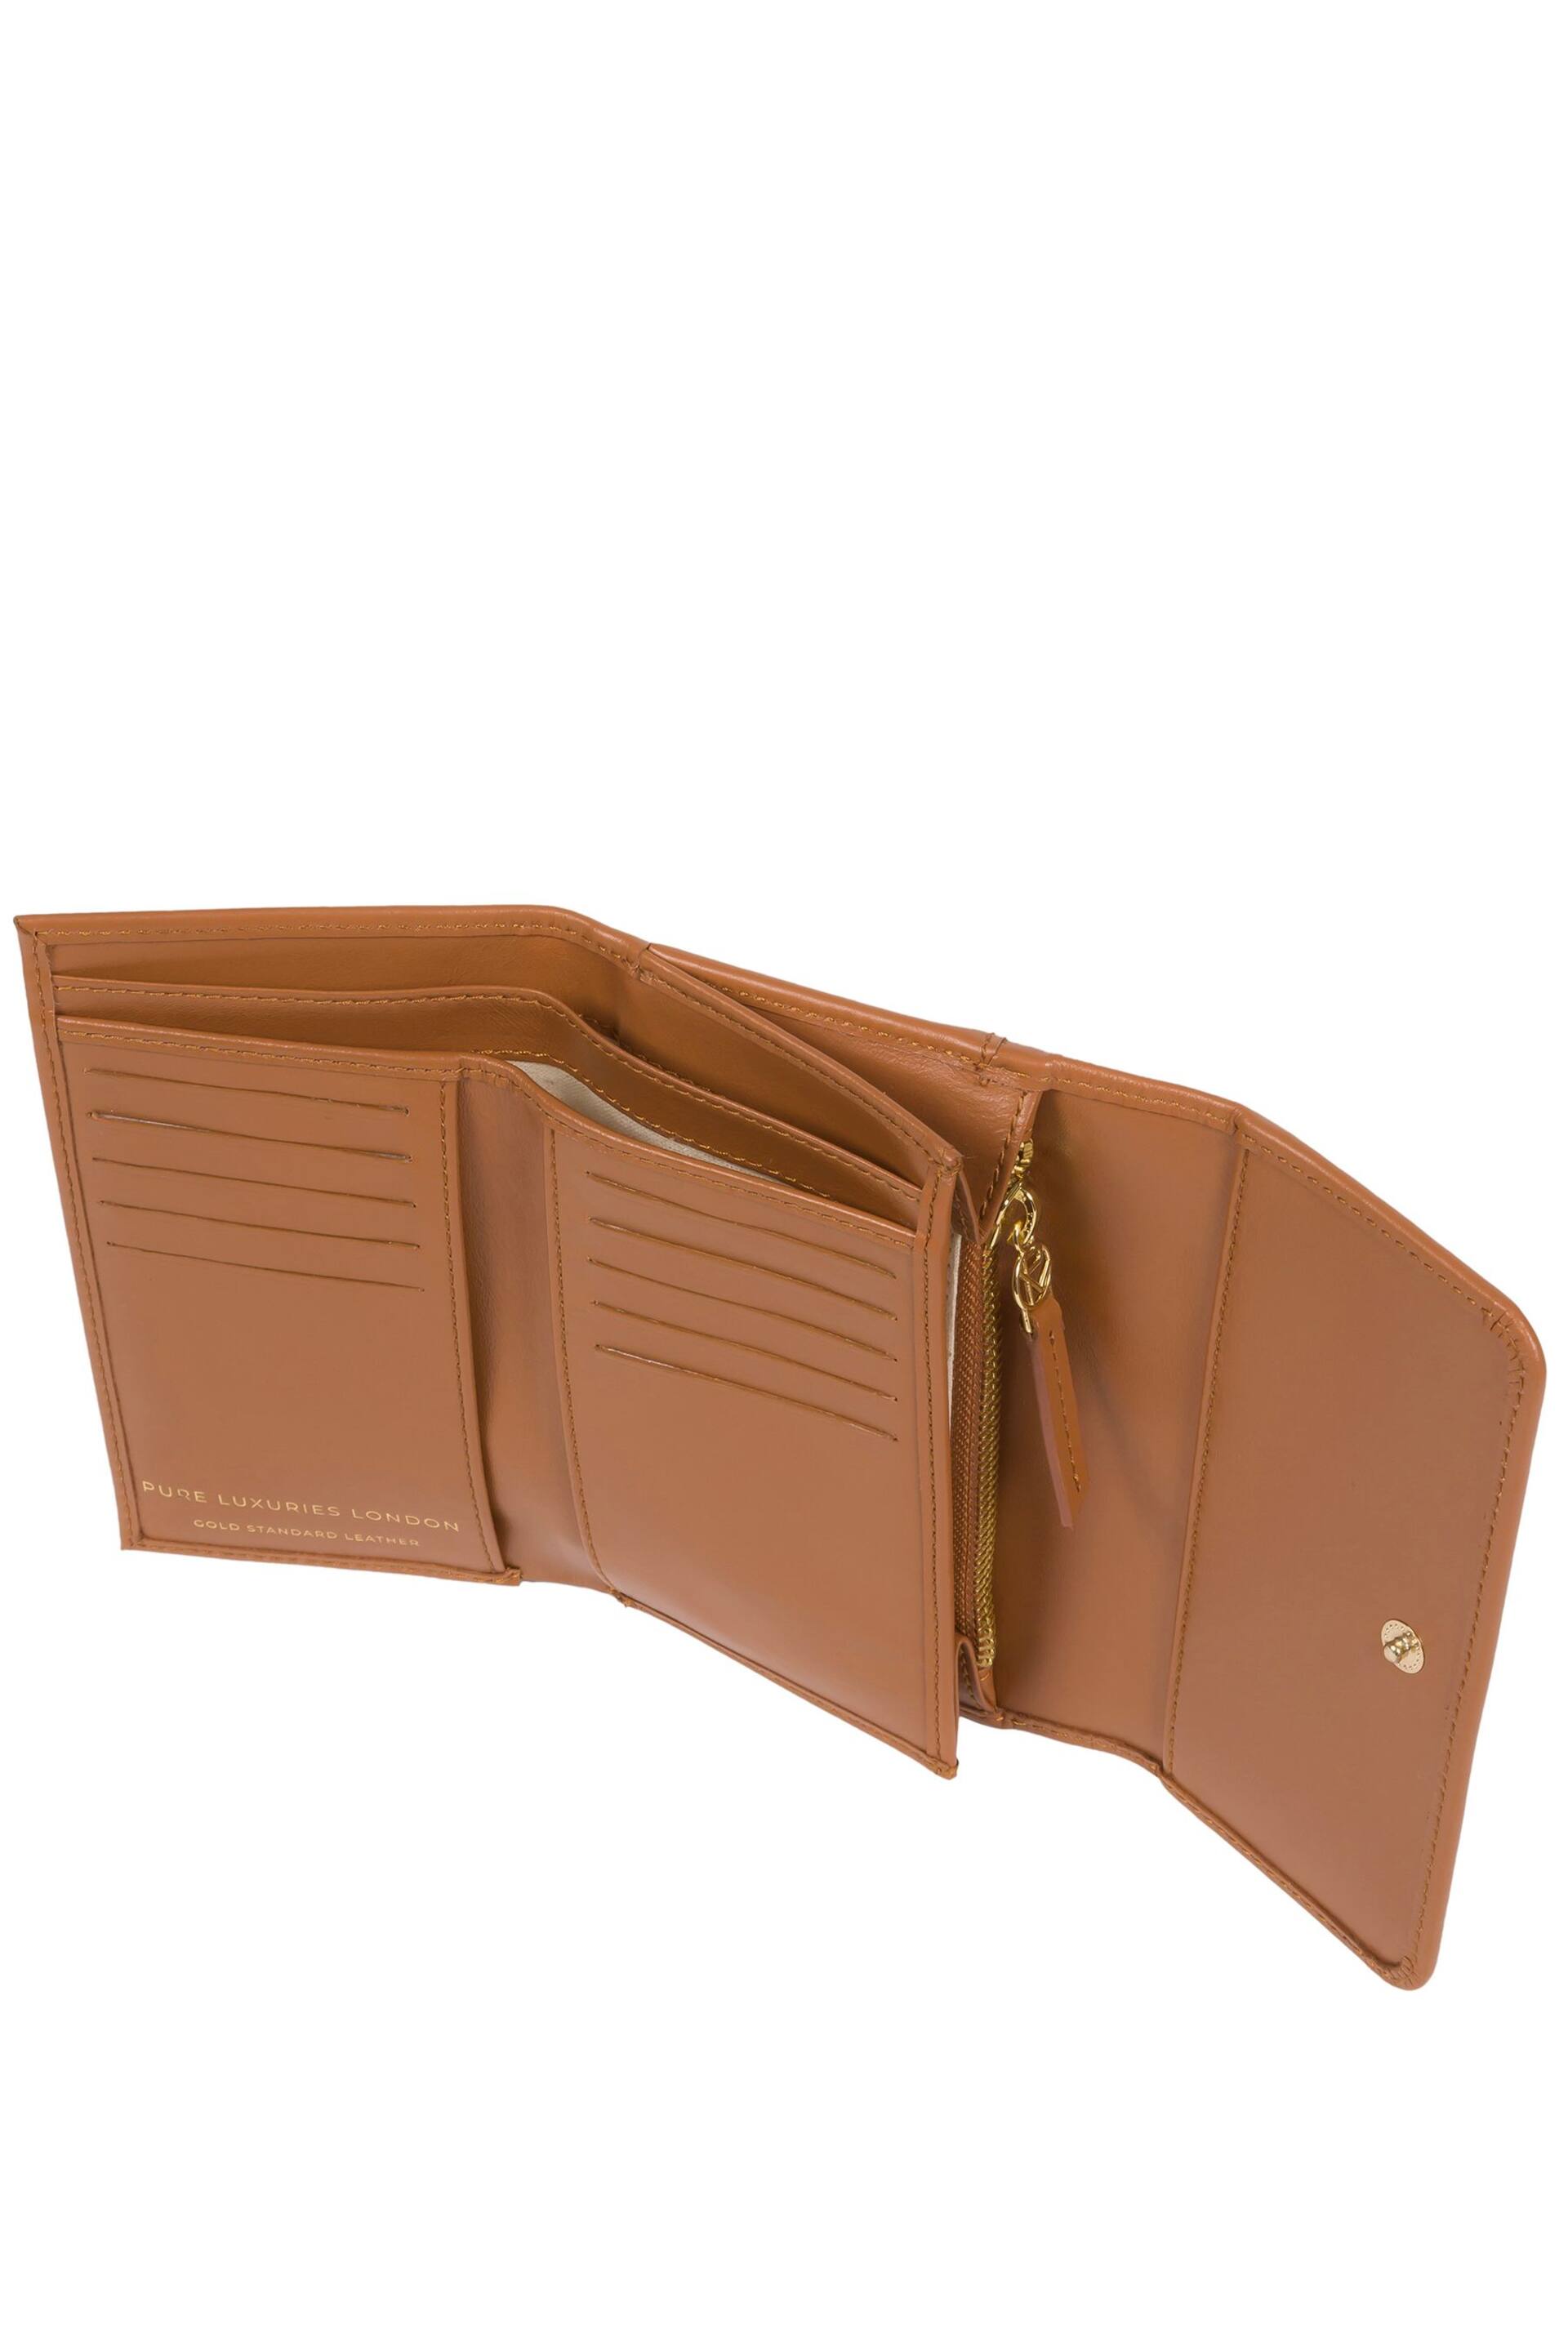 Pure Luxuries London Metz Leather Tri-Fold Purse - Image 5 of 6